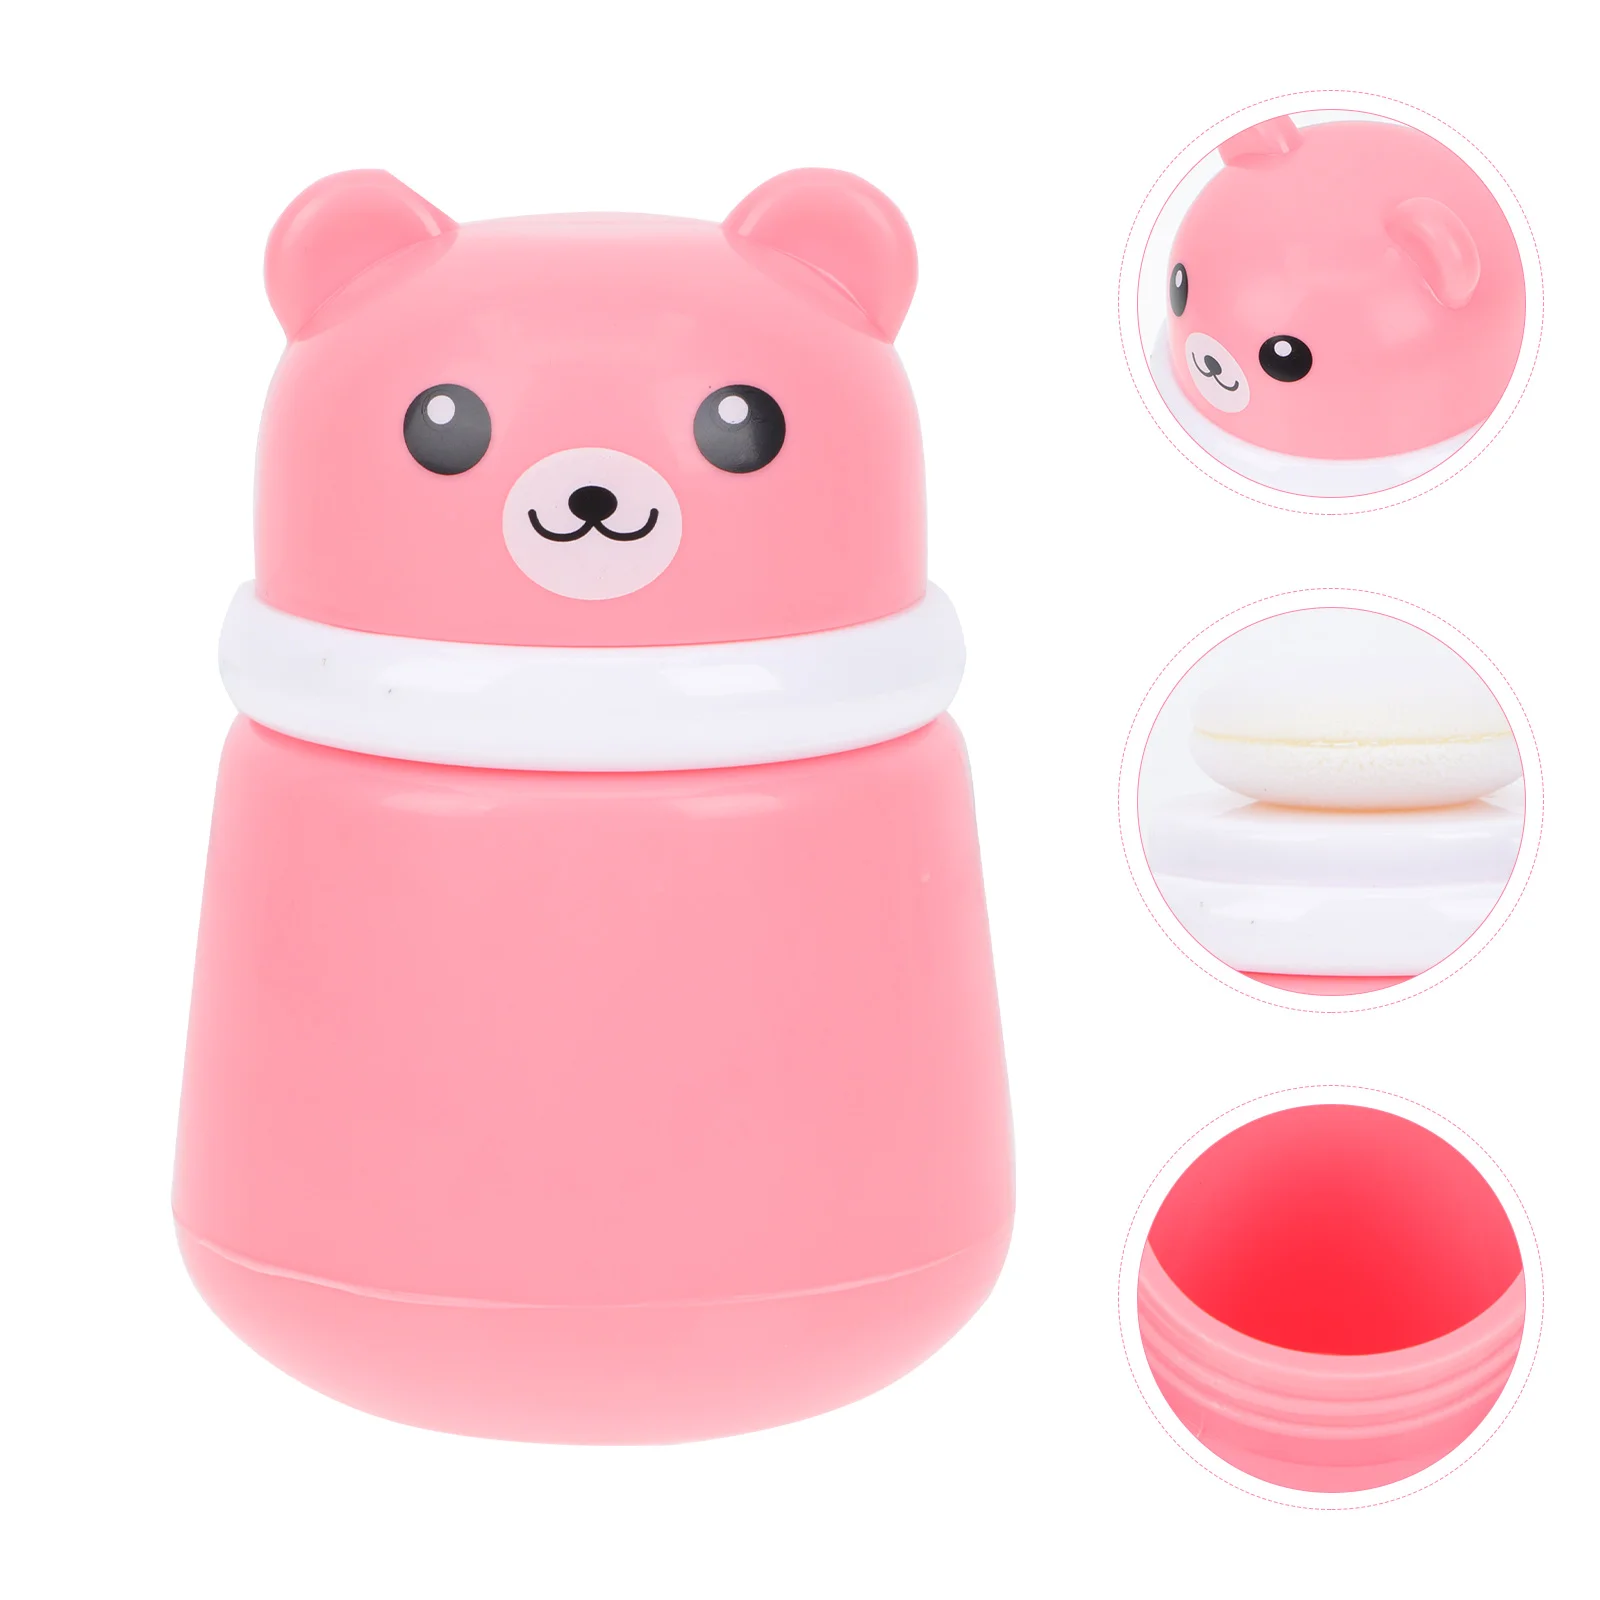 

Puff Box Container Body Baby Case Bottle Loose Talcum Empty Applicator Infant Makeup Puffs Dusting Storage Toddler Compact Kids